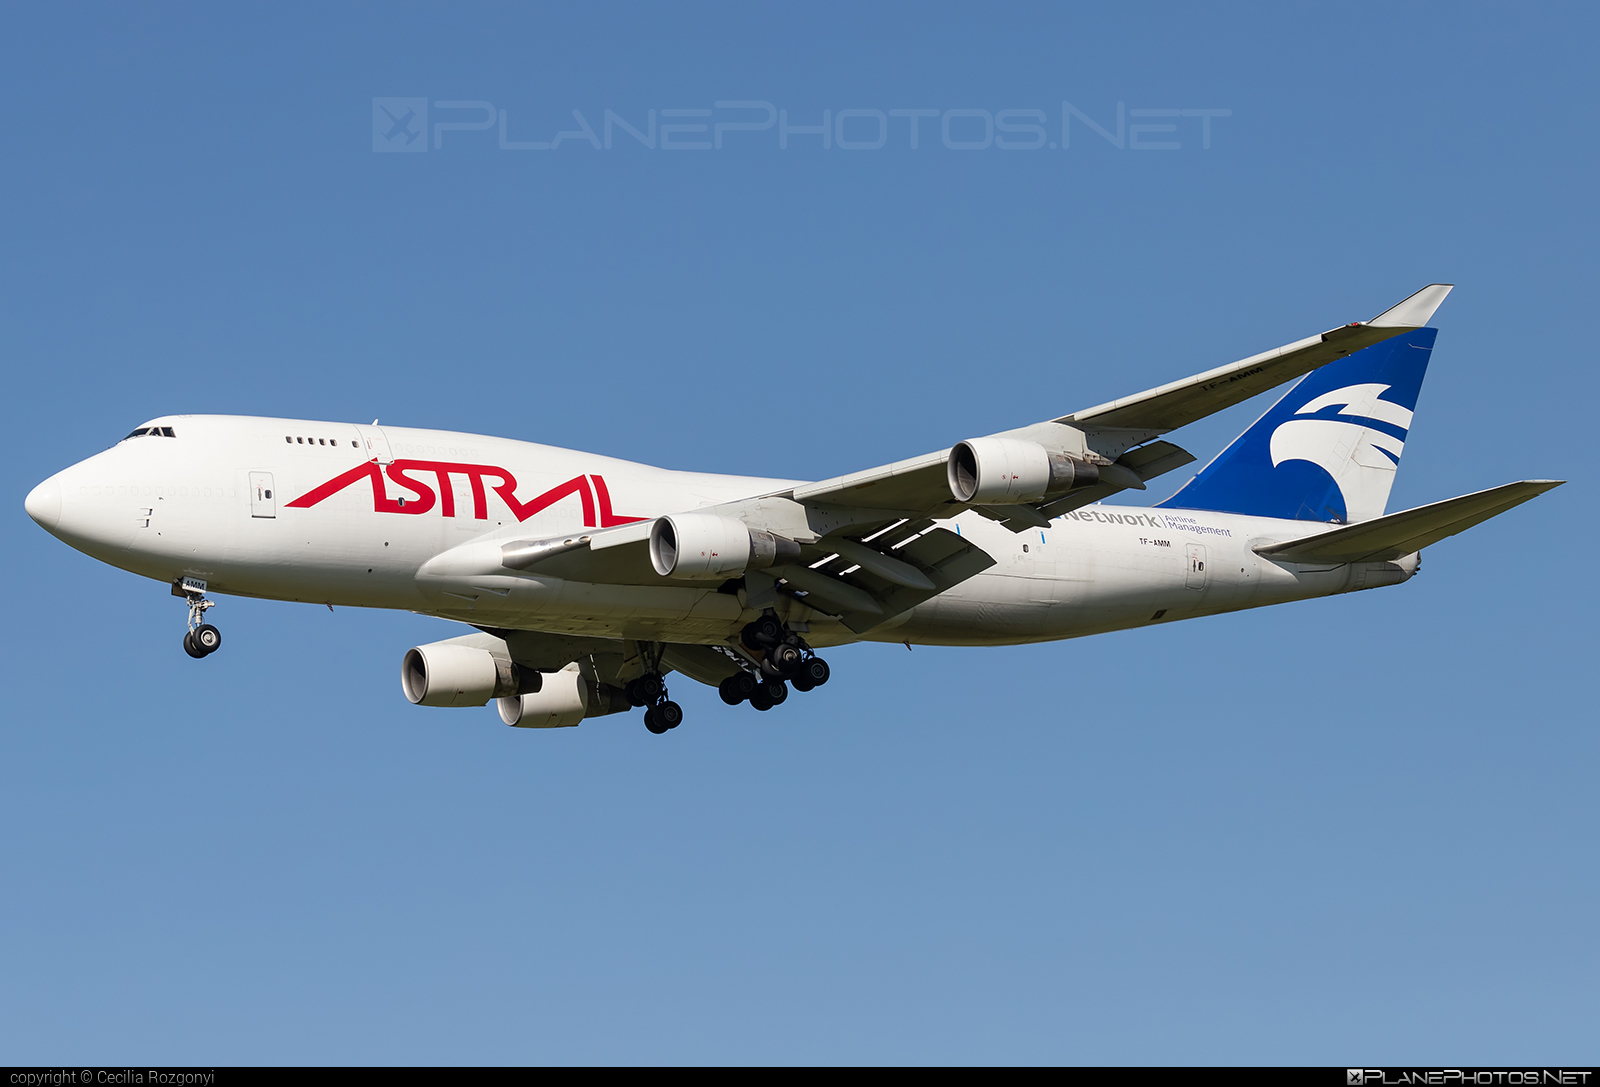 Boeing 747-400SF - TF-AMM operated by Astral Aviation #astralaviation #b747 #b747sf #boeing #boeing747 #jumbo